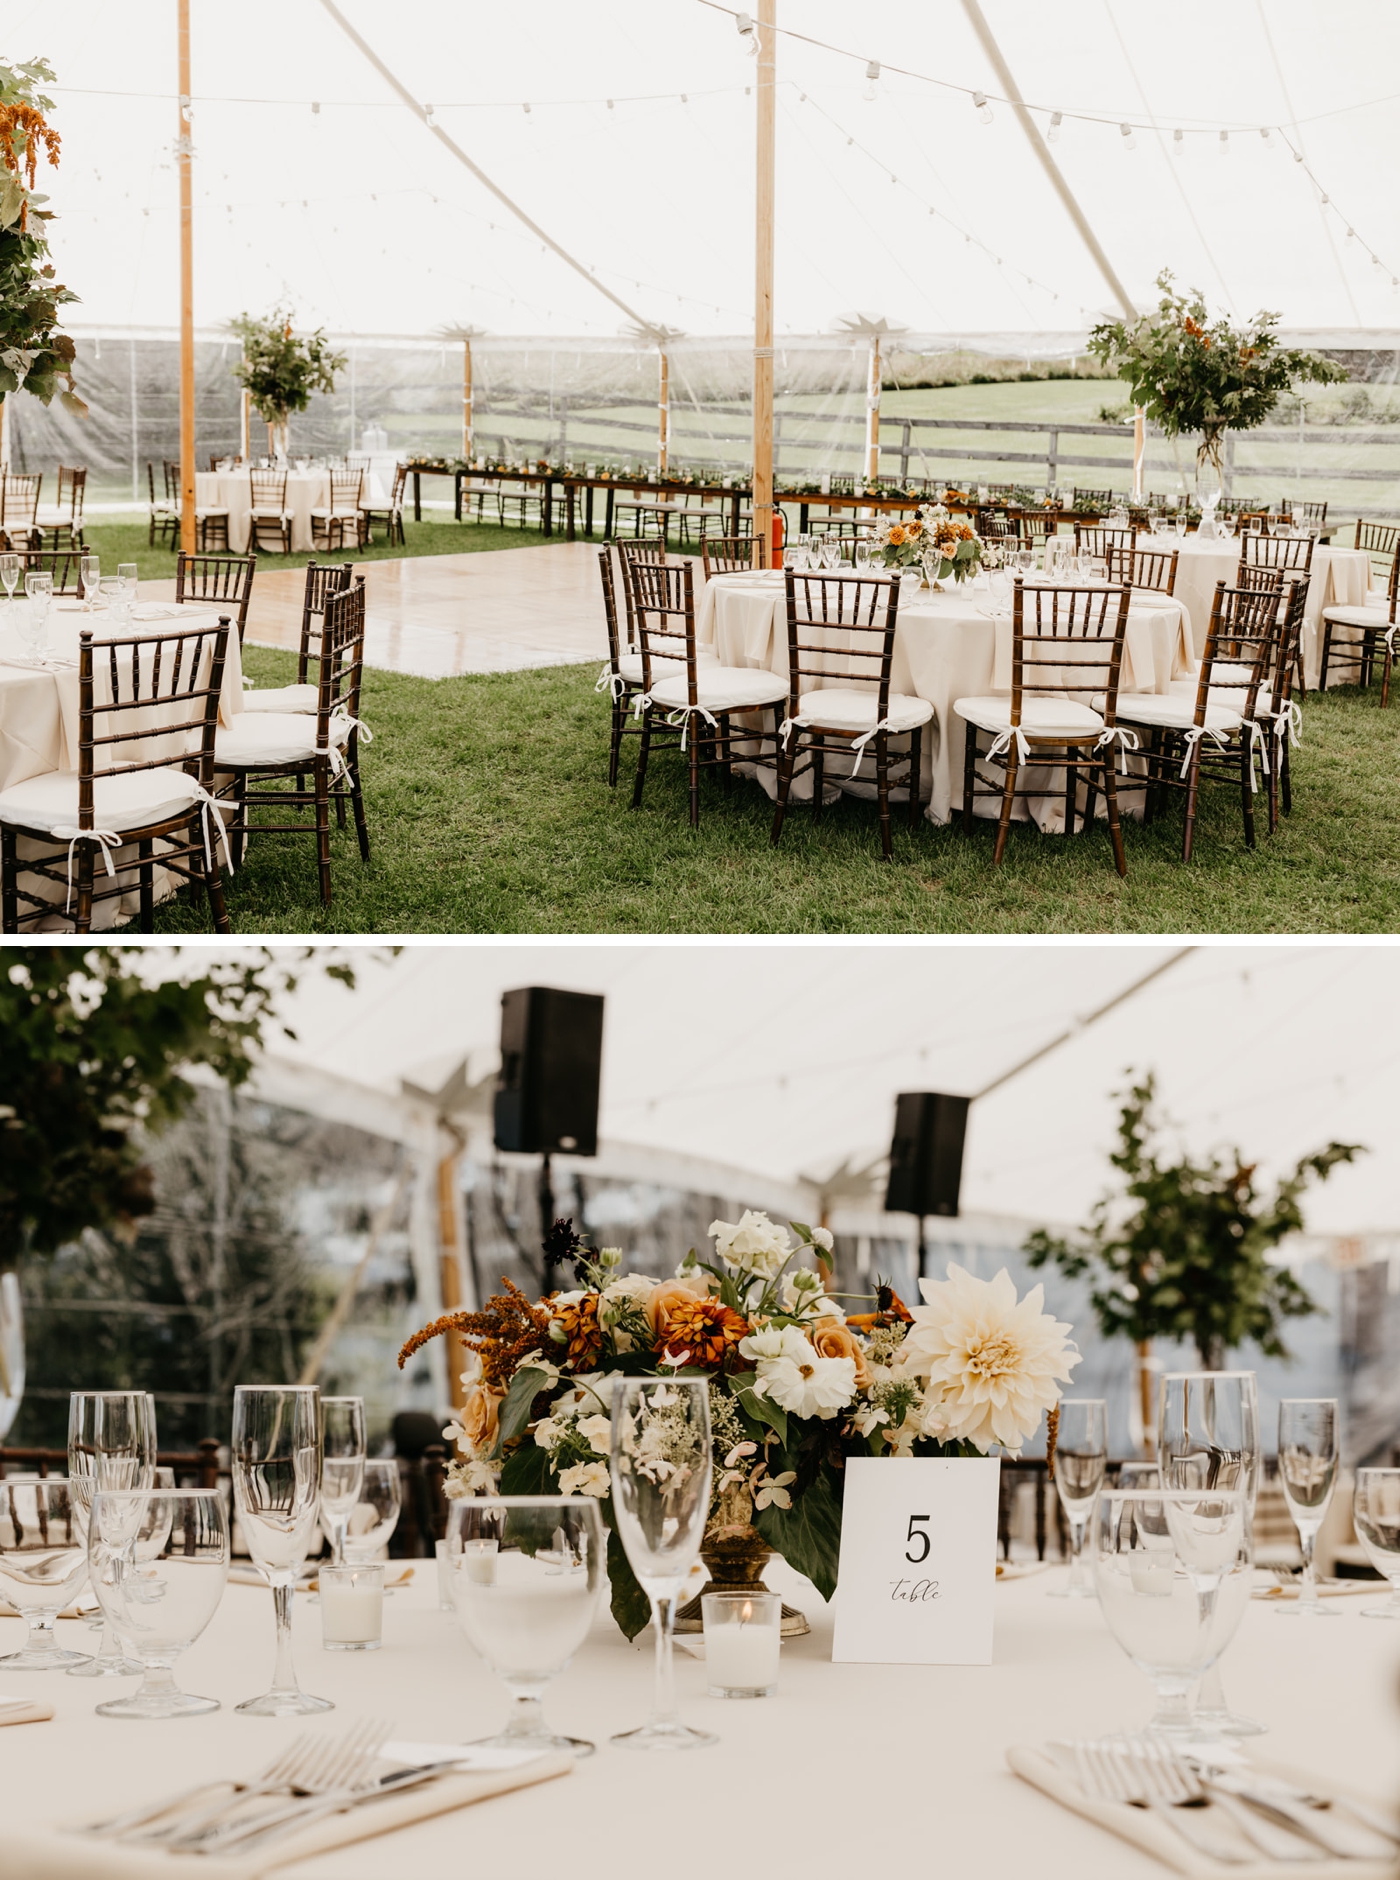 Tented wedding reception at Toad Hill Farm